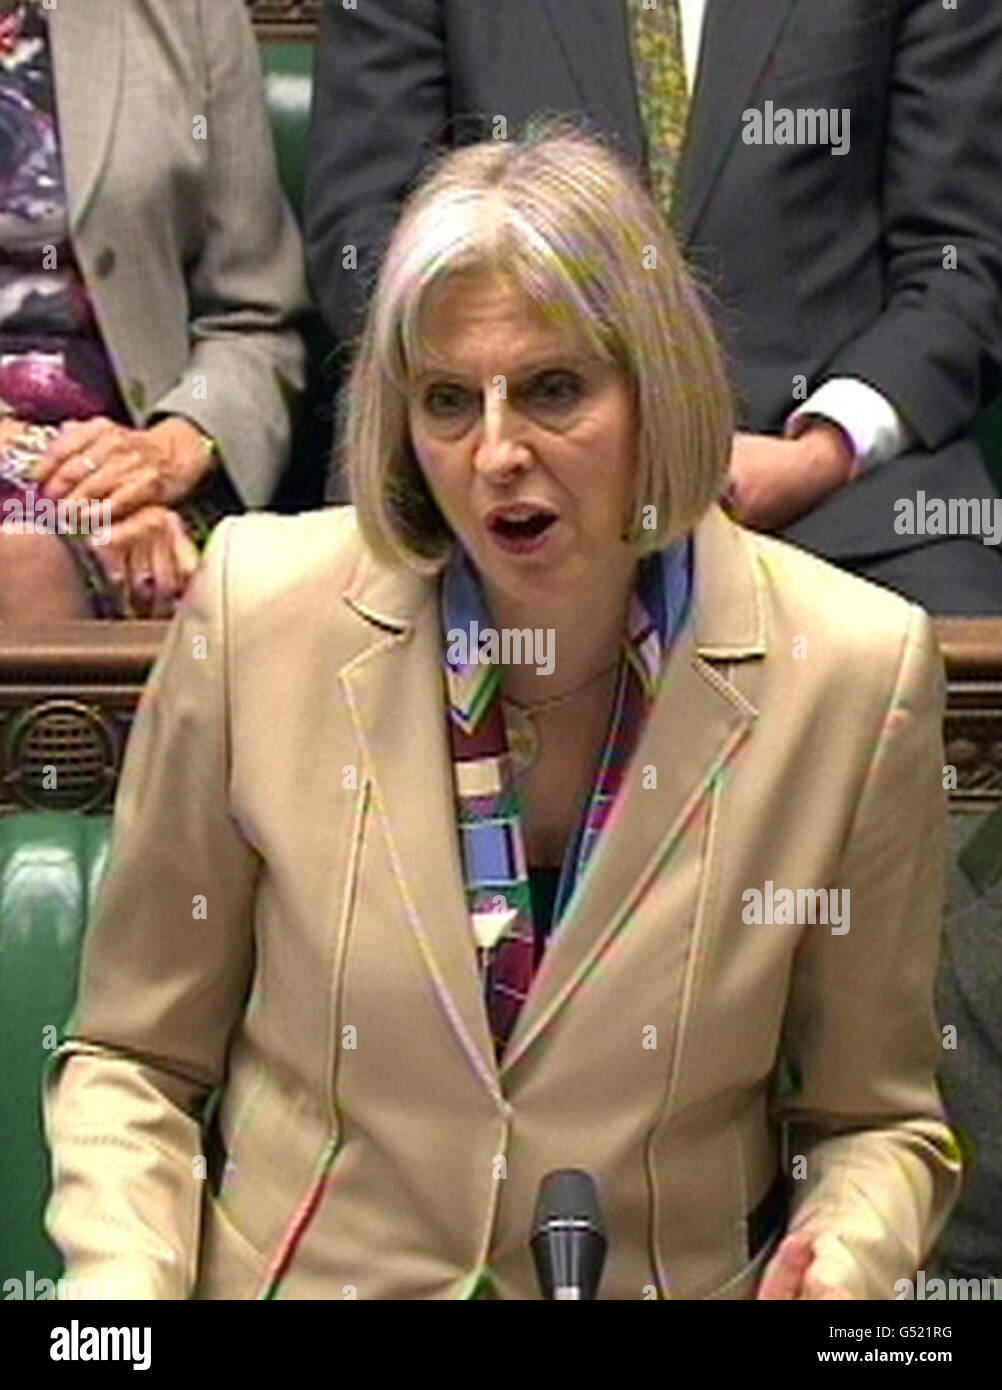 Home Secretary Theresa May speaks in the House of Commons, London, where she announced plans to introduce minimum alcohol pricing. Stock Photo